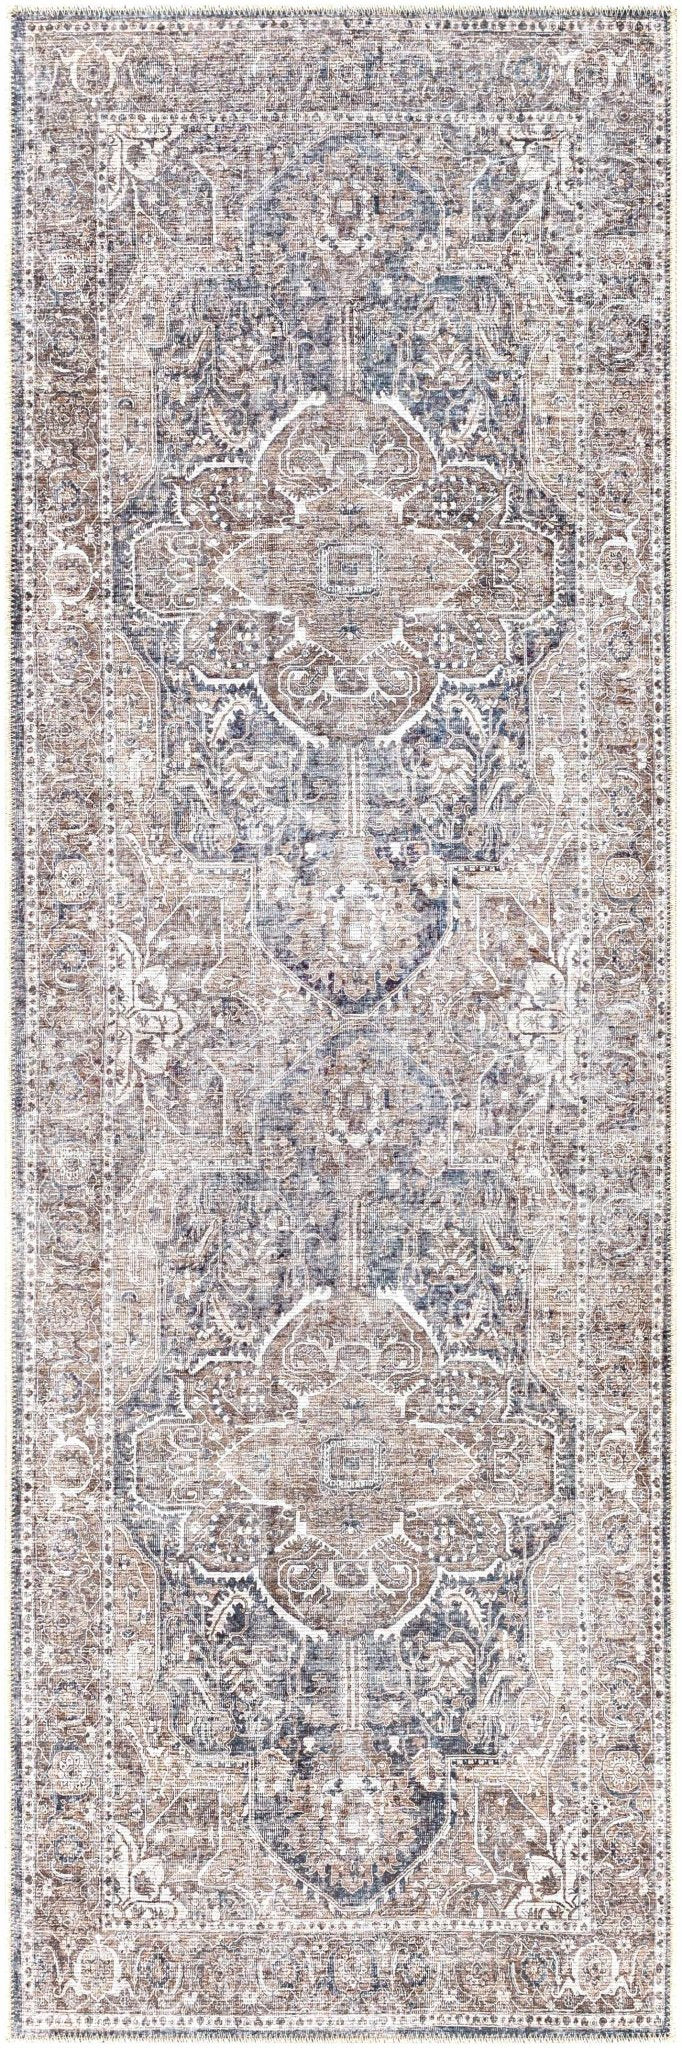 Antique look Transitional Charcoal, Ivory and Brown Medallion Machine washable Rug - The Rug Decor